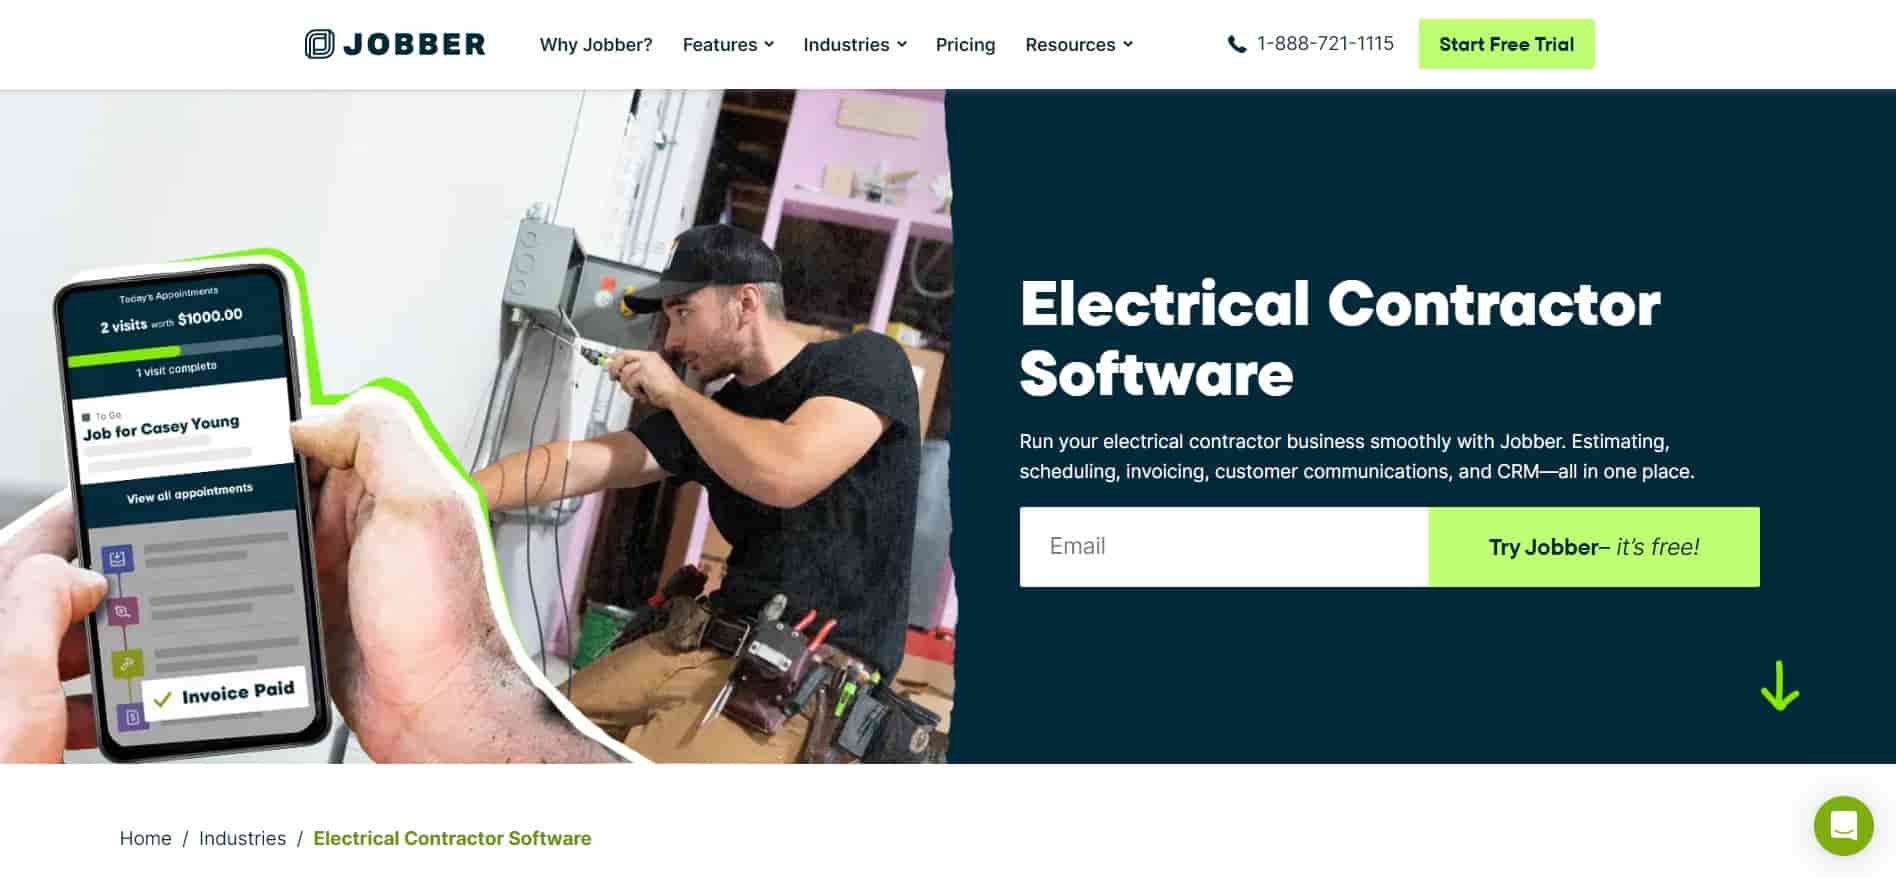 Jobber's homepage showing a technician working in a electrical project